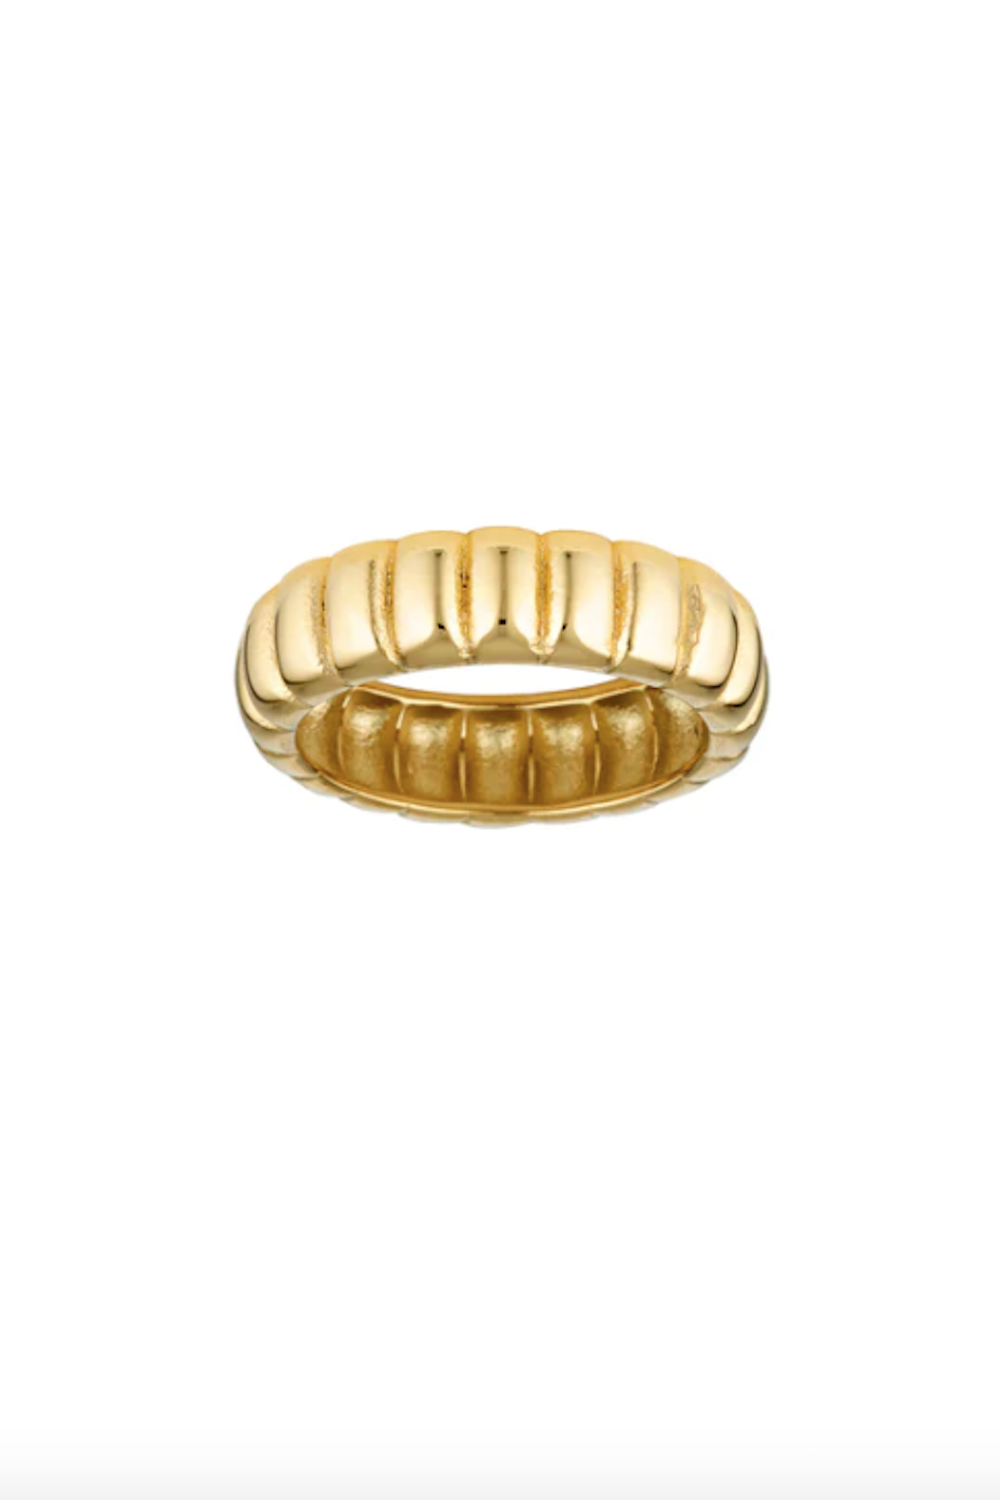 Caterpillar Ring | Gold Plated